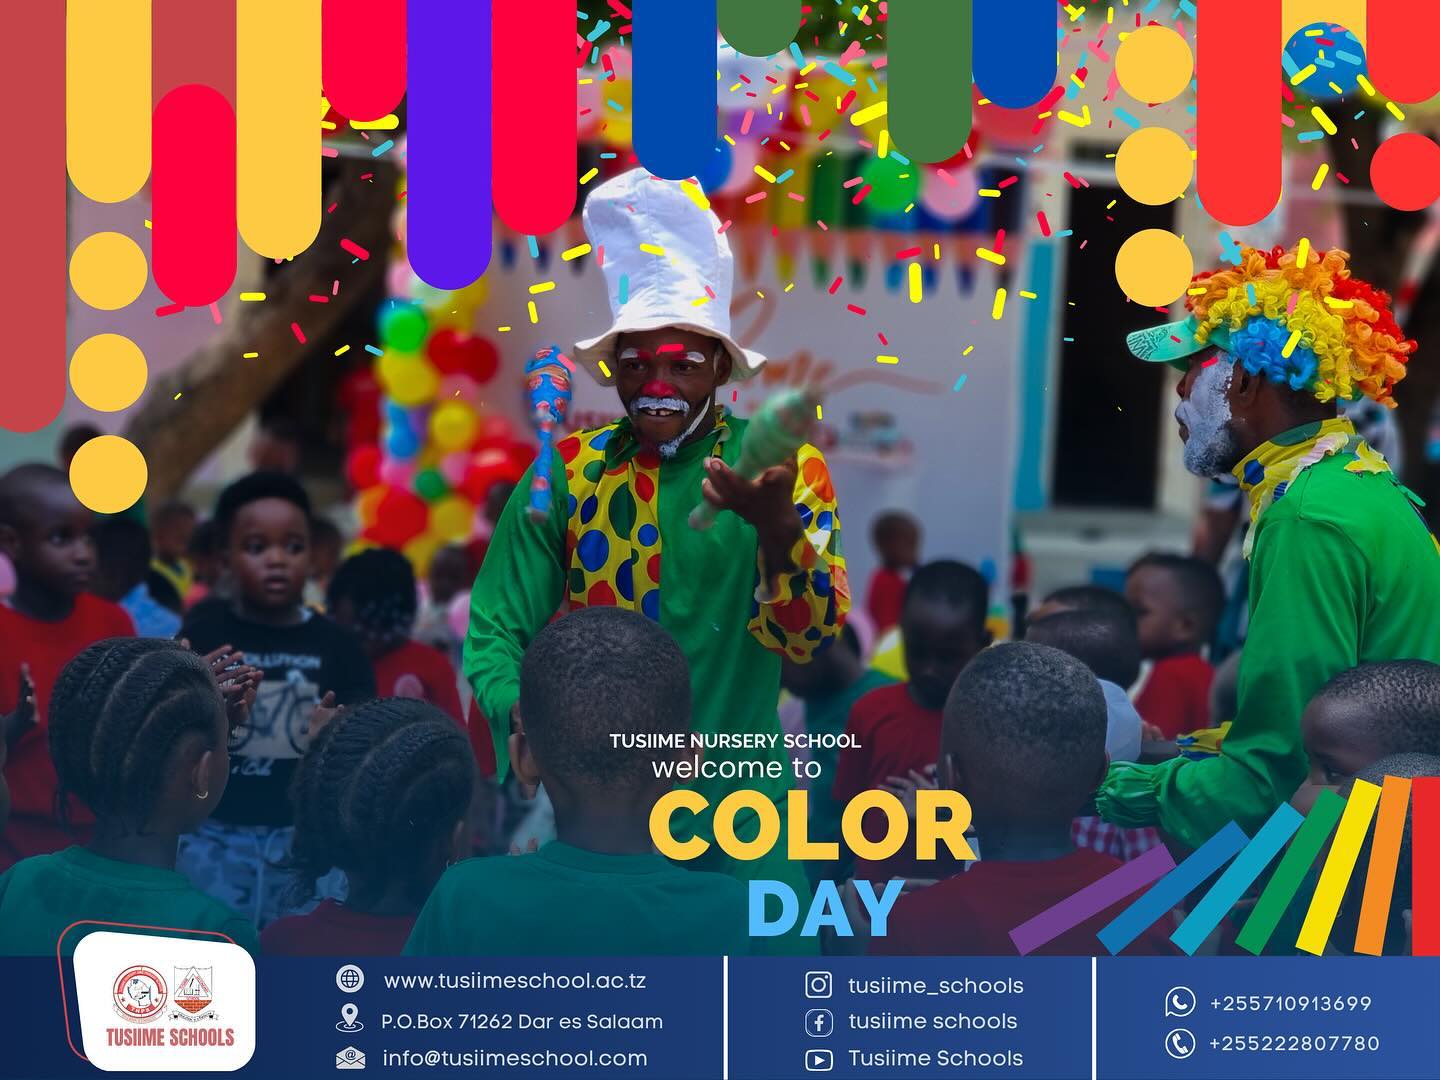 Bursting with colors and smiles, Tusiime Nursery School’s Color Day was a spectacle of joy and creativity! From vibrant outfits to lively activities, our little stars shone brightly in every hue. Here’s to a day that painted our hearts with happiness and our memories with every shade of fun.#TusiimeColorDay #JoyInEveryColor #tusiime #tusiimeschools #tusiimeprimaryschool #tusiimenurseryandprimaryschool